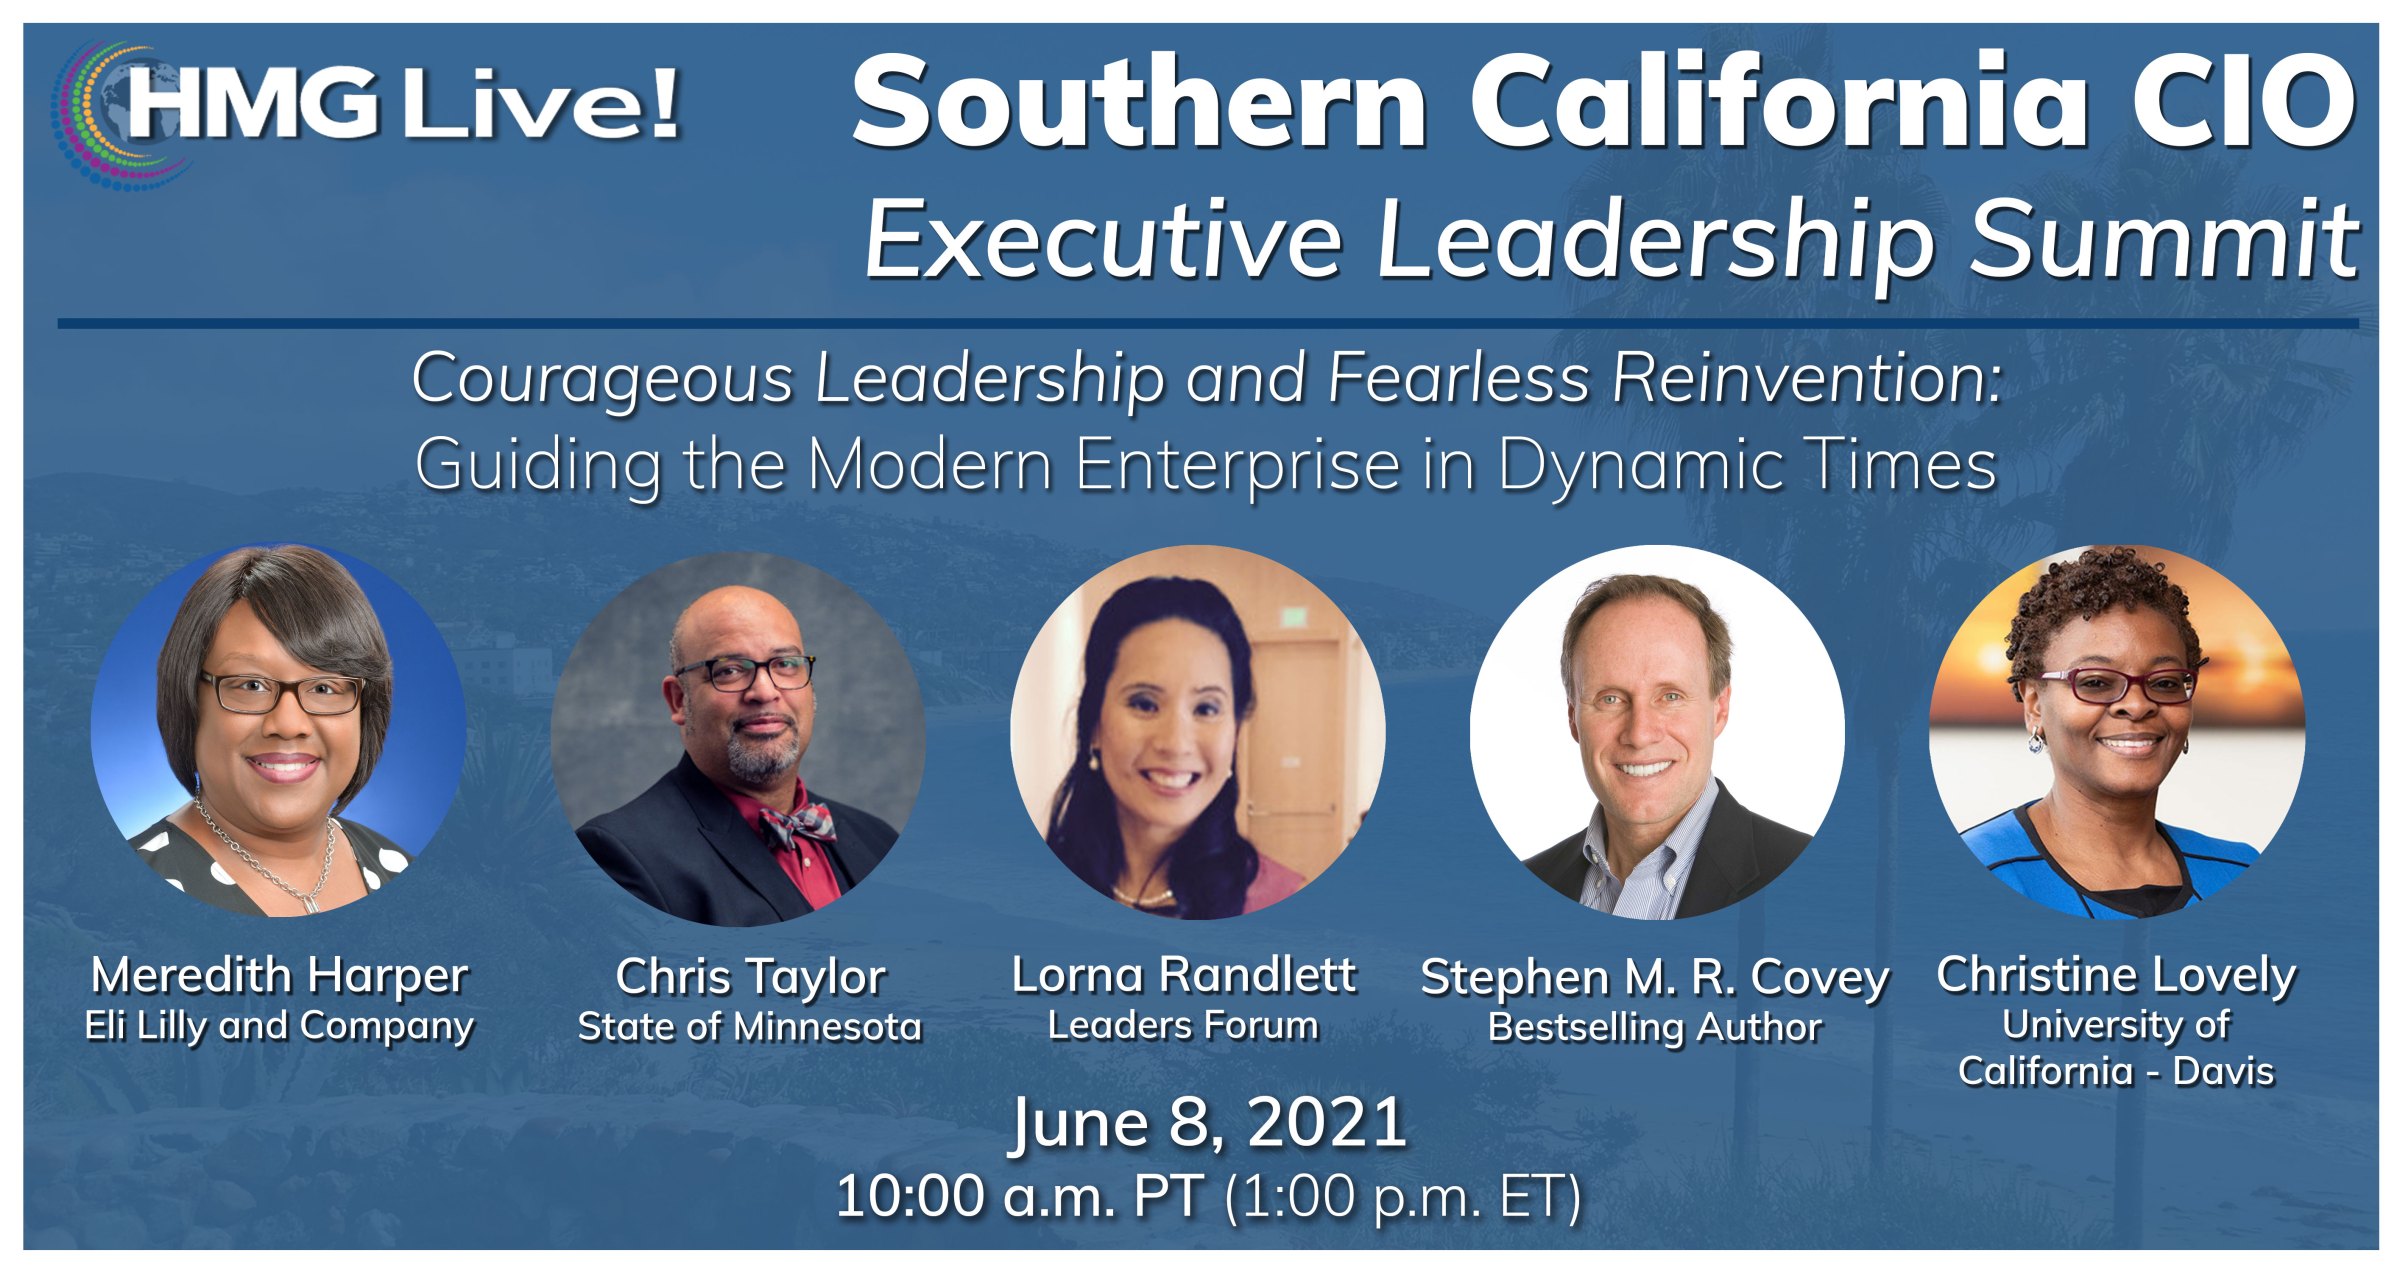 CIO Leadership: Navigating the Turbulent Social Climate in the Workplace Will Steer the Discussion at the 2021 HMG Live! Southern California CIO Executive Leadership Summit on June 8